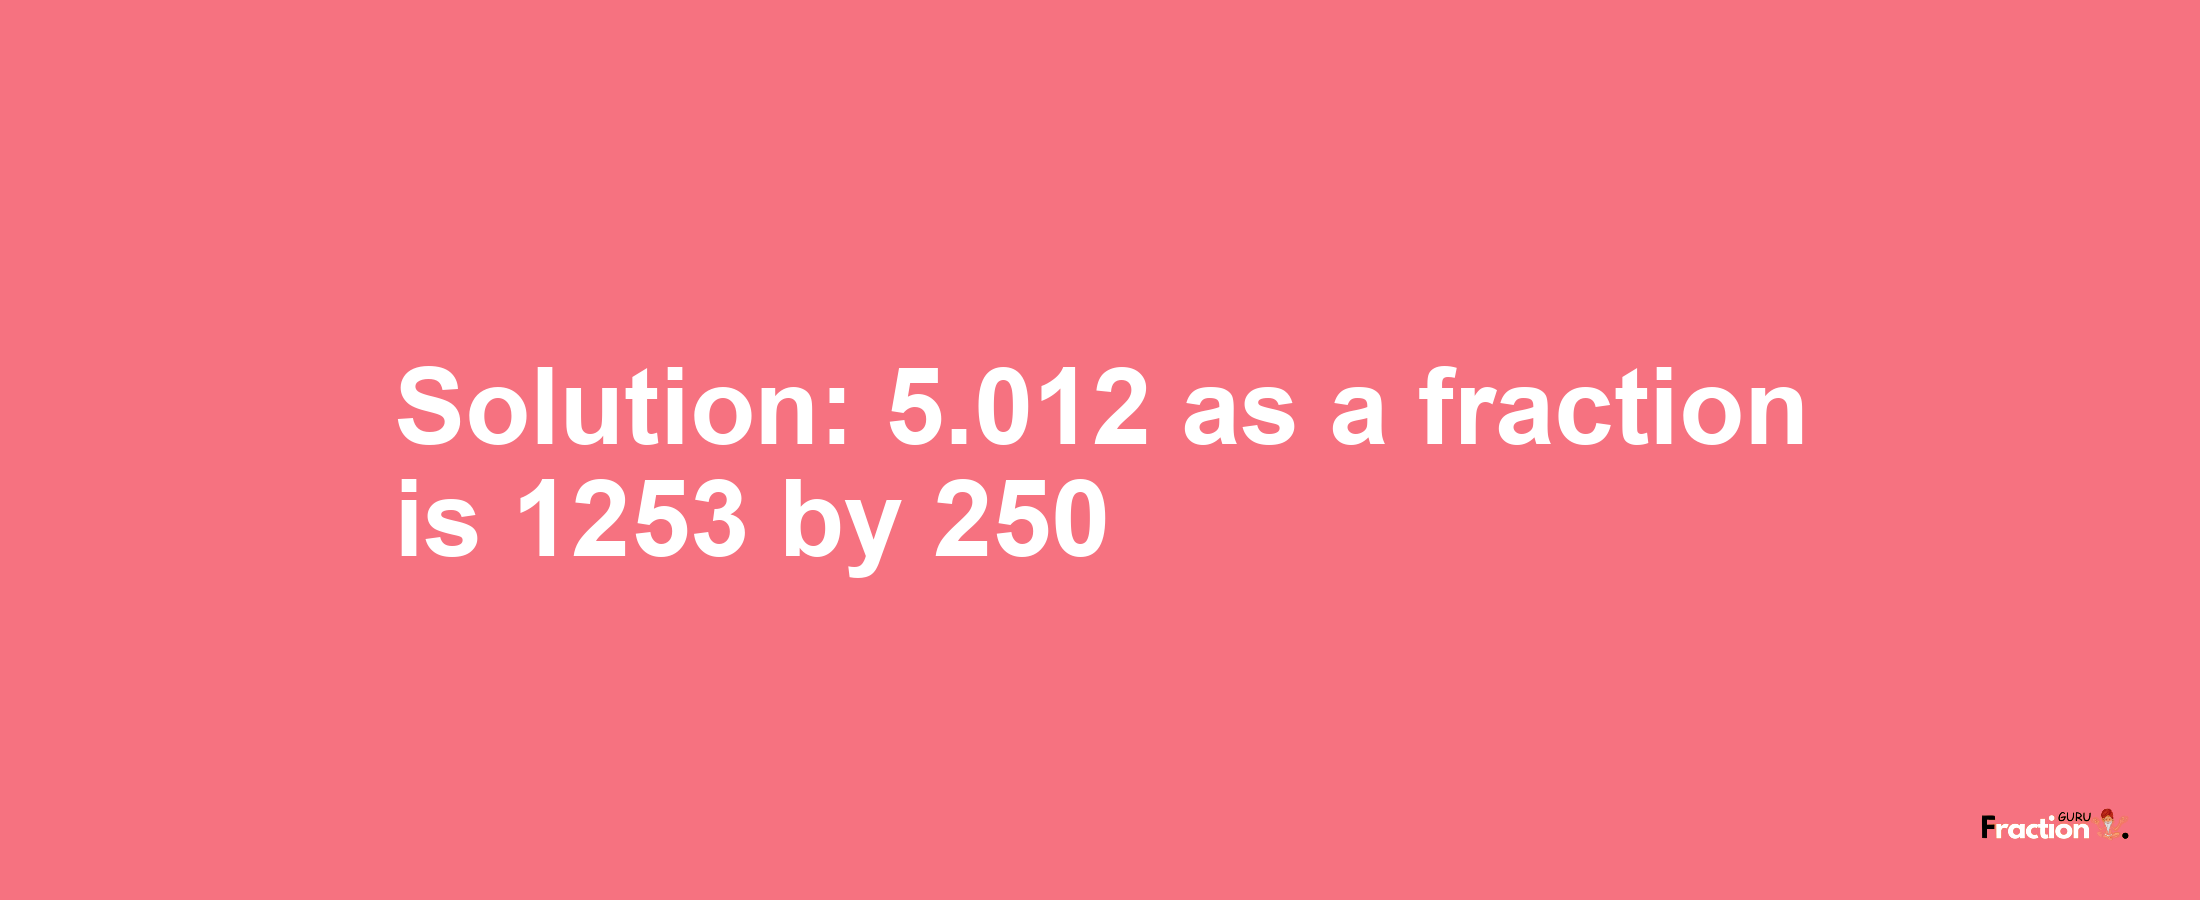 Solution:5.012 as a fraction is 1253/250